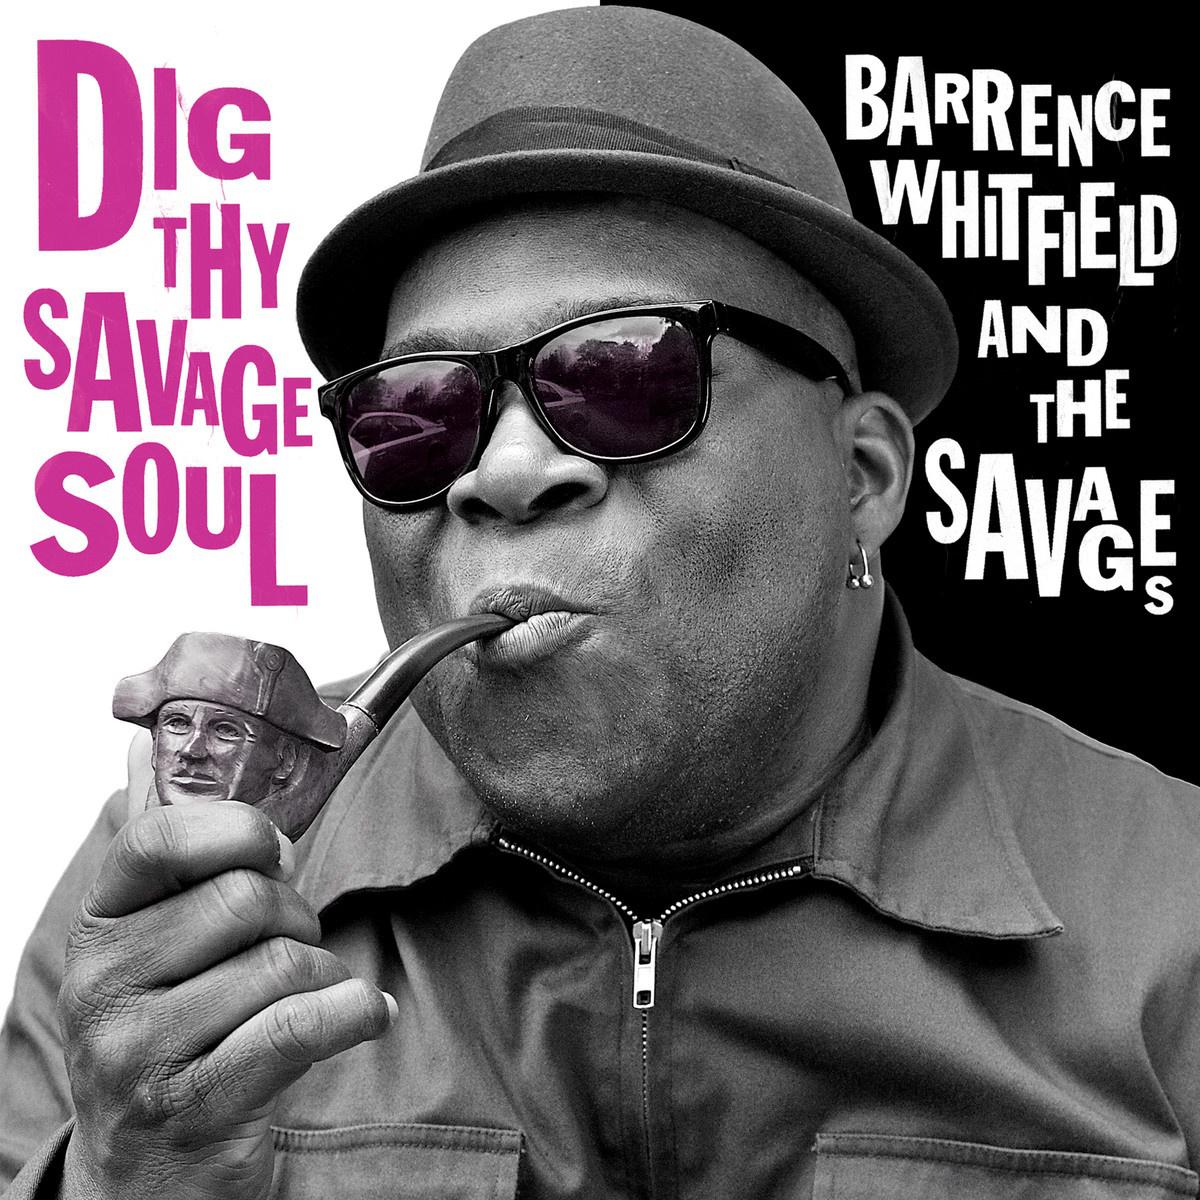 Barrence Whitfield and The Savages - Oscar Levant